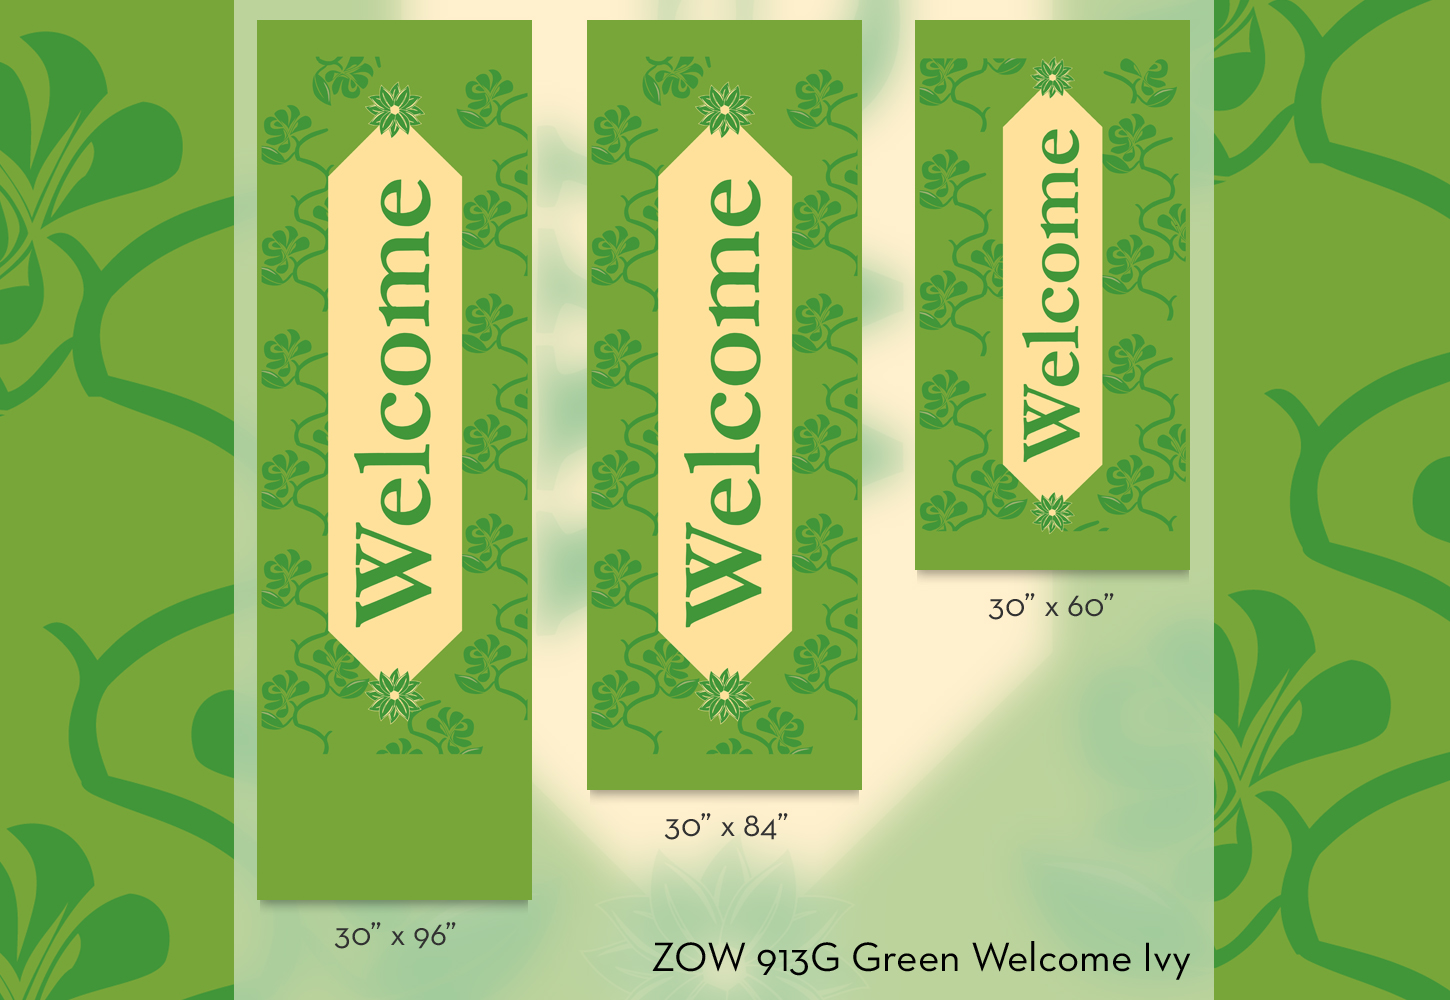 ZOW 913G Green Welcome Ivy